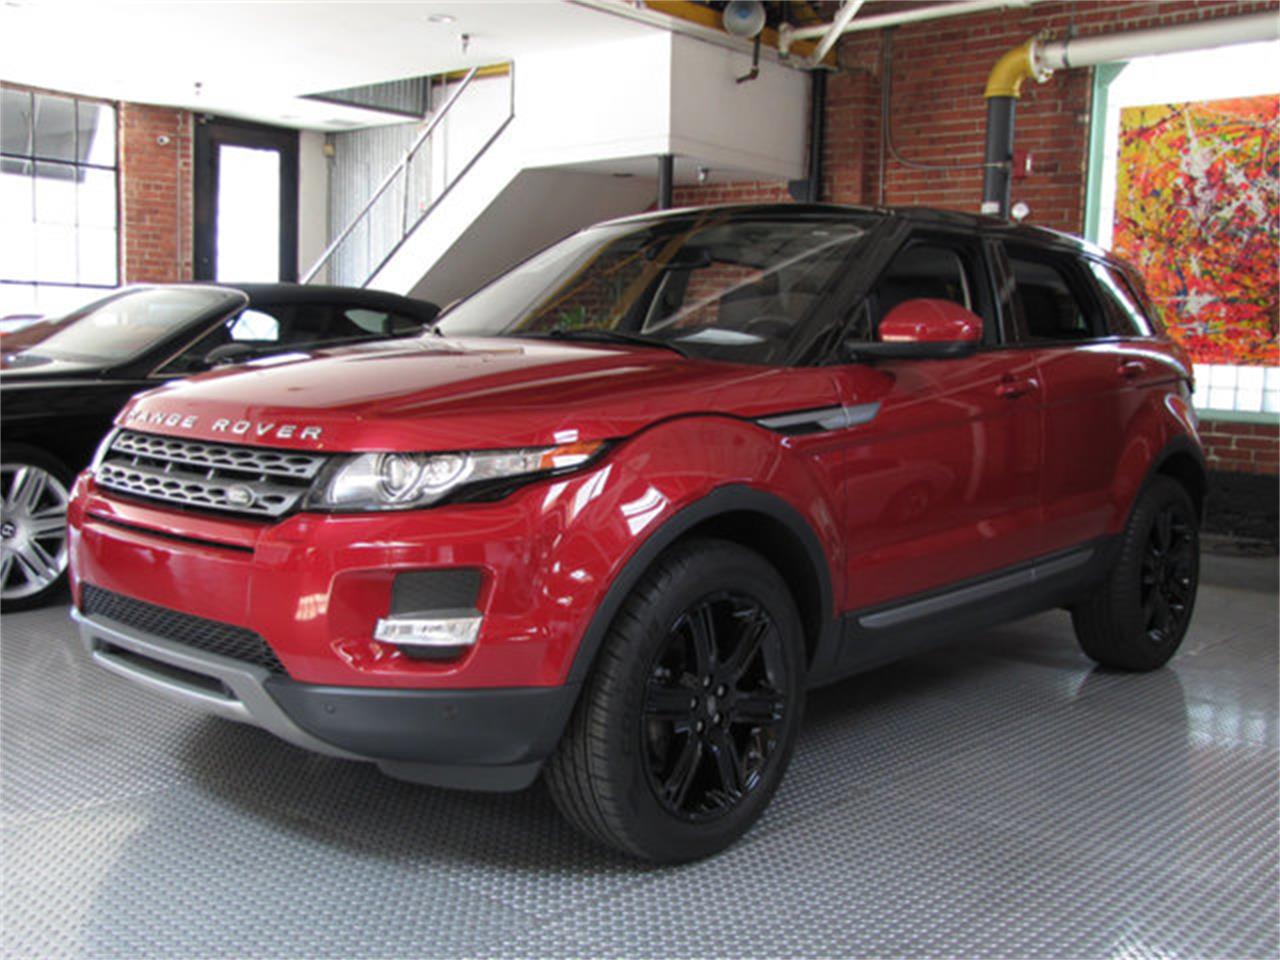 2015 Land Rover Range Rover Evoque For Sale Classiccars